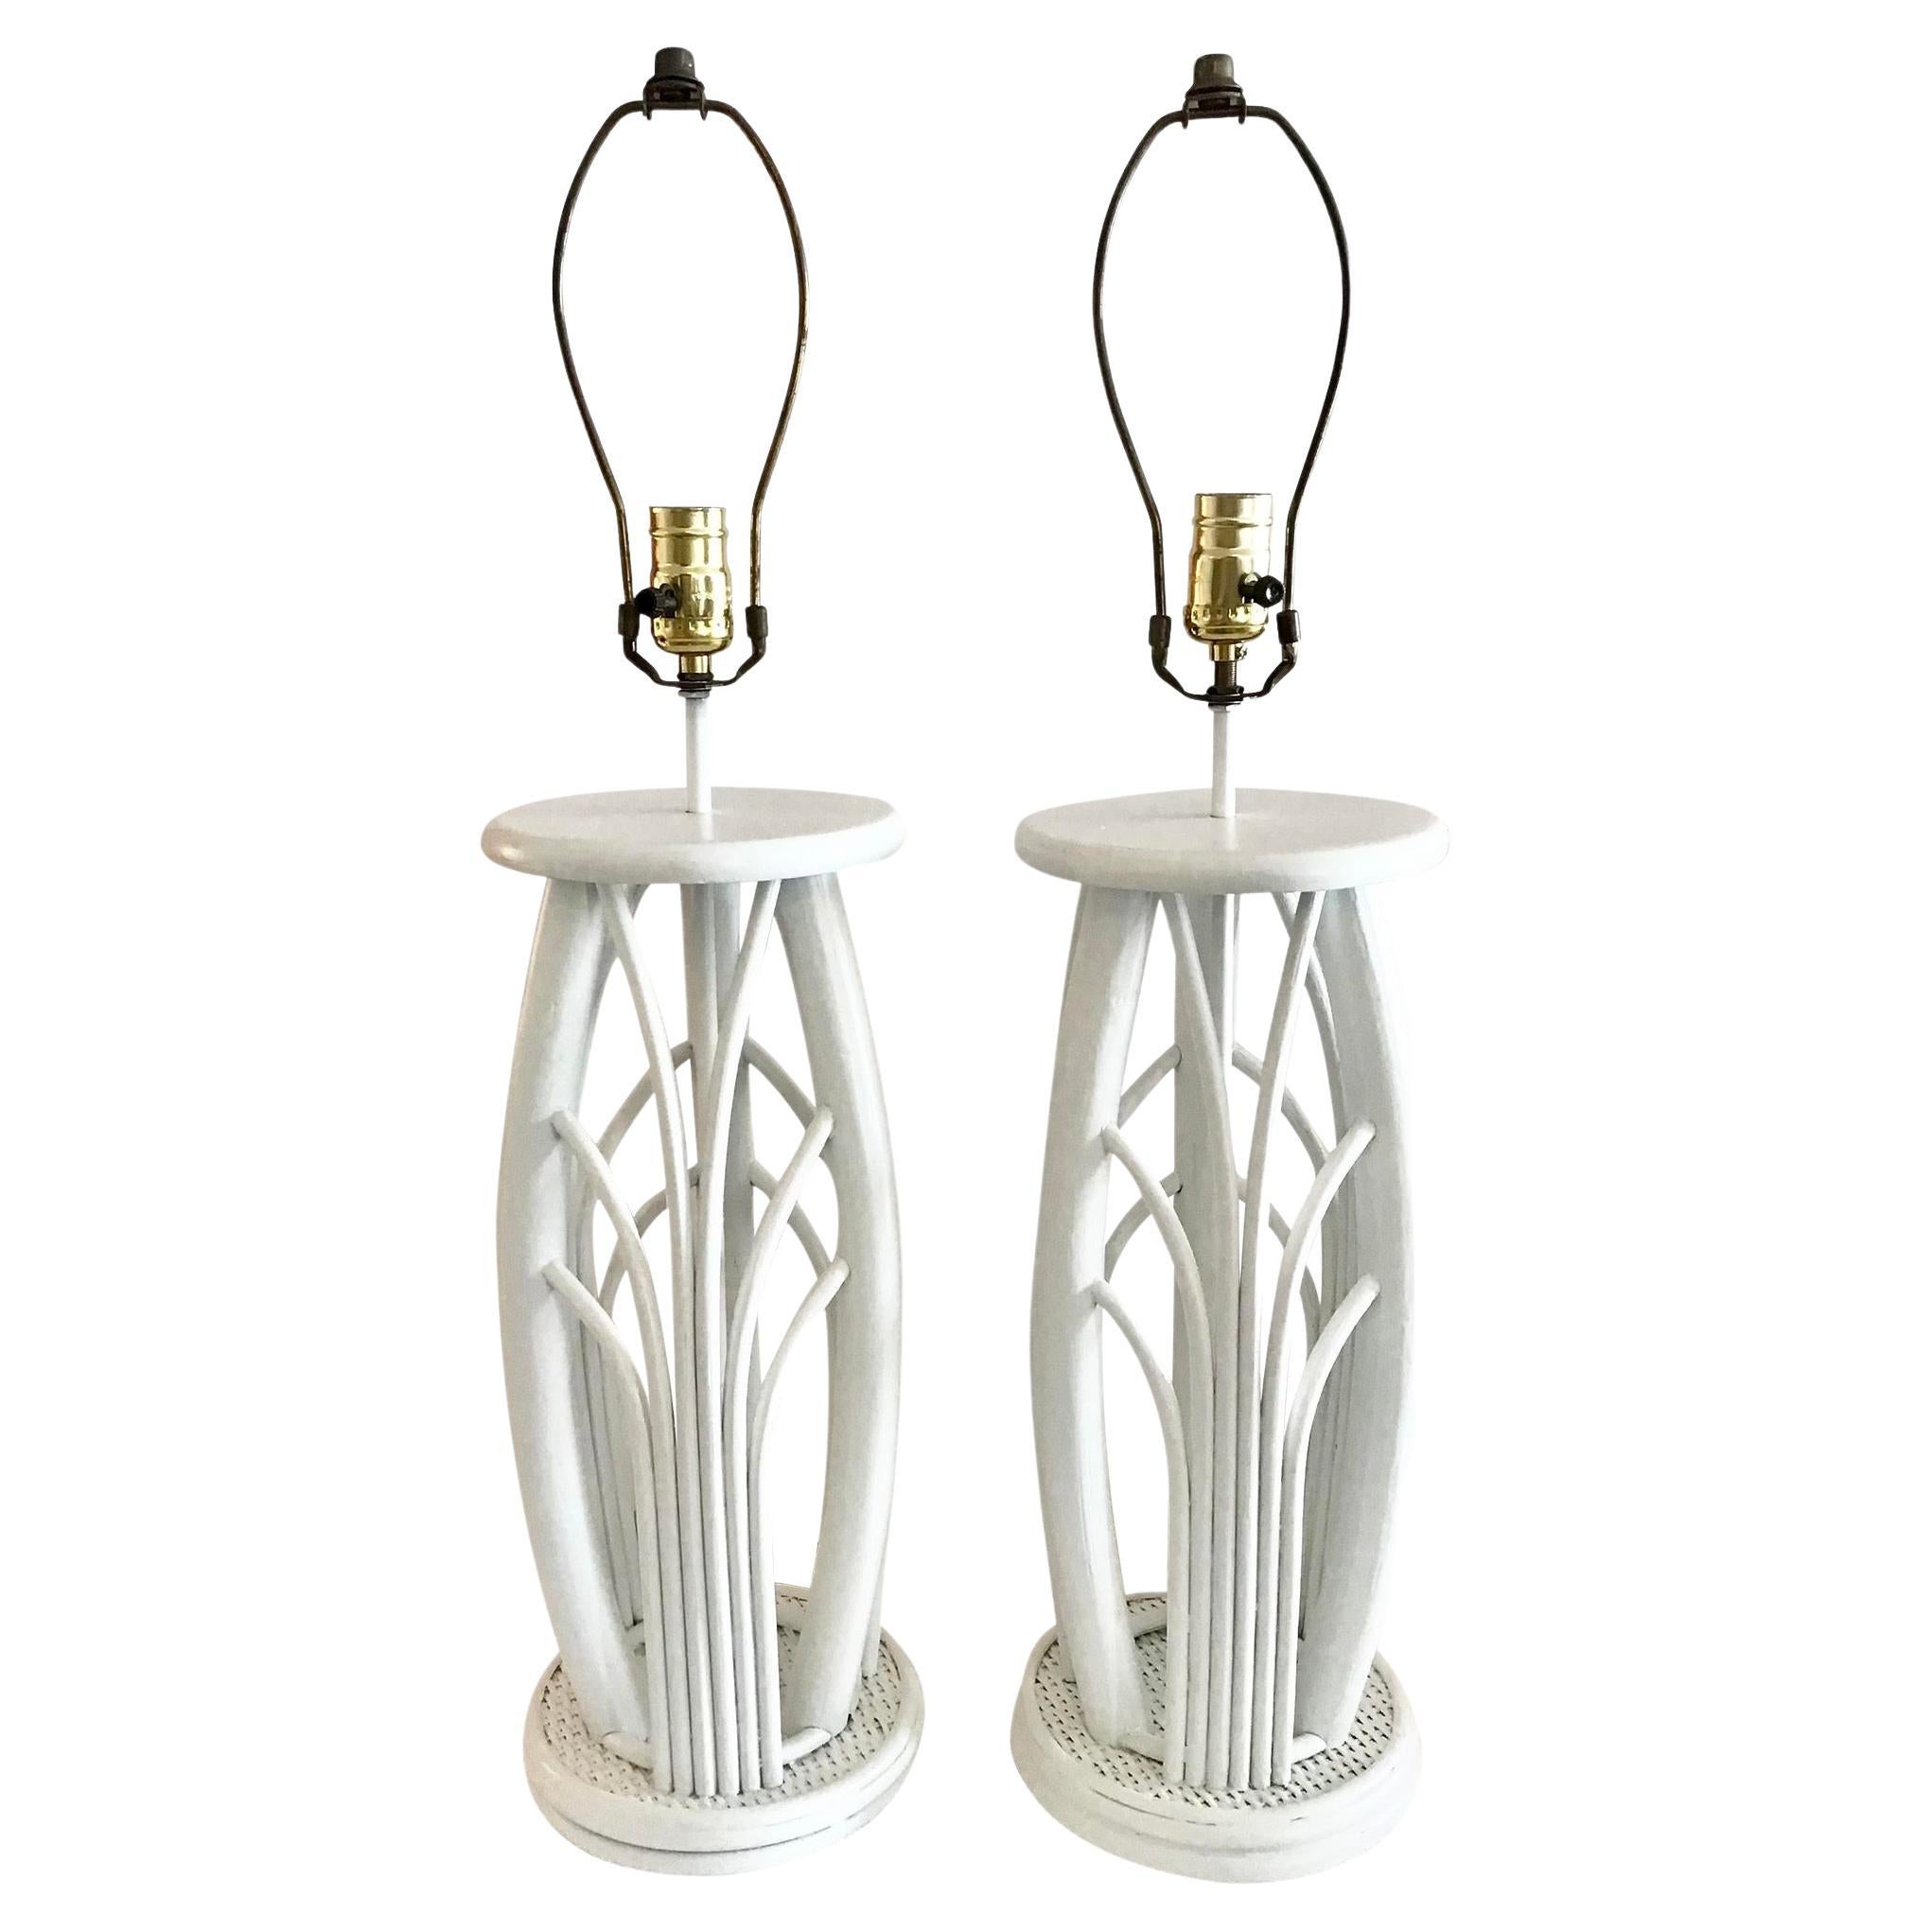 Boho Chic Pencil Reed Table Lamps, a Pair